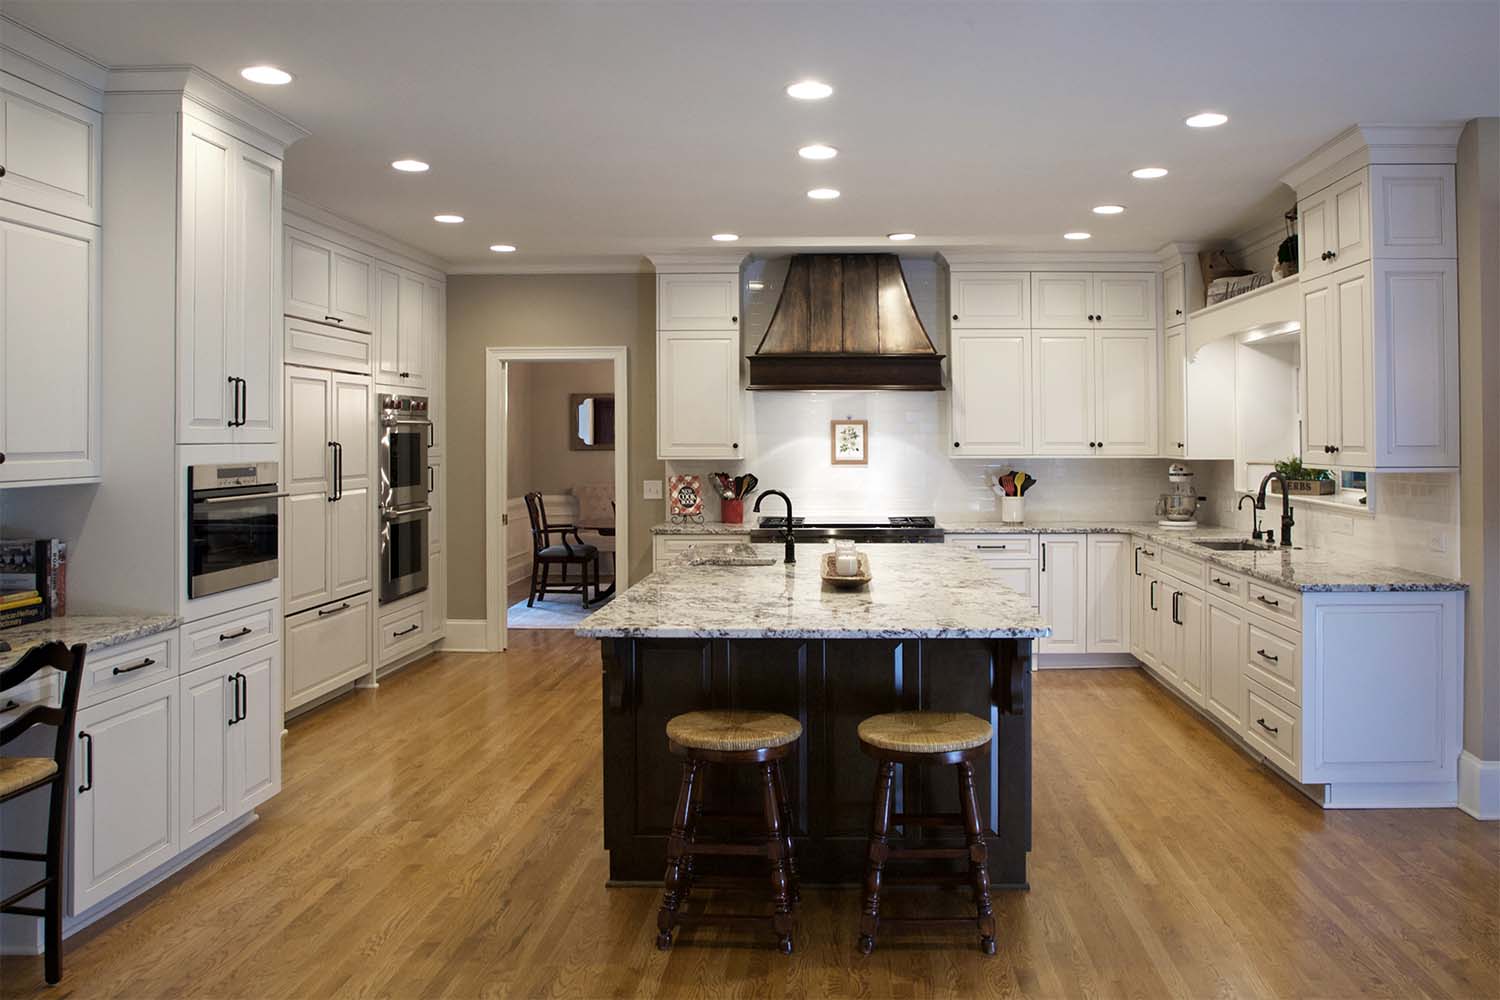 Does Your Custom Home Need A Custom Gourmet Kitchen? We Can Help